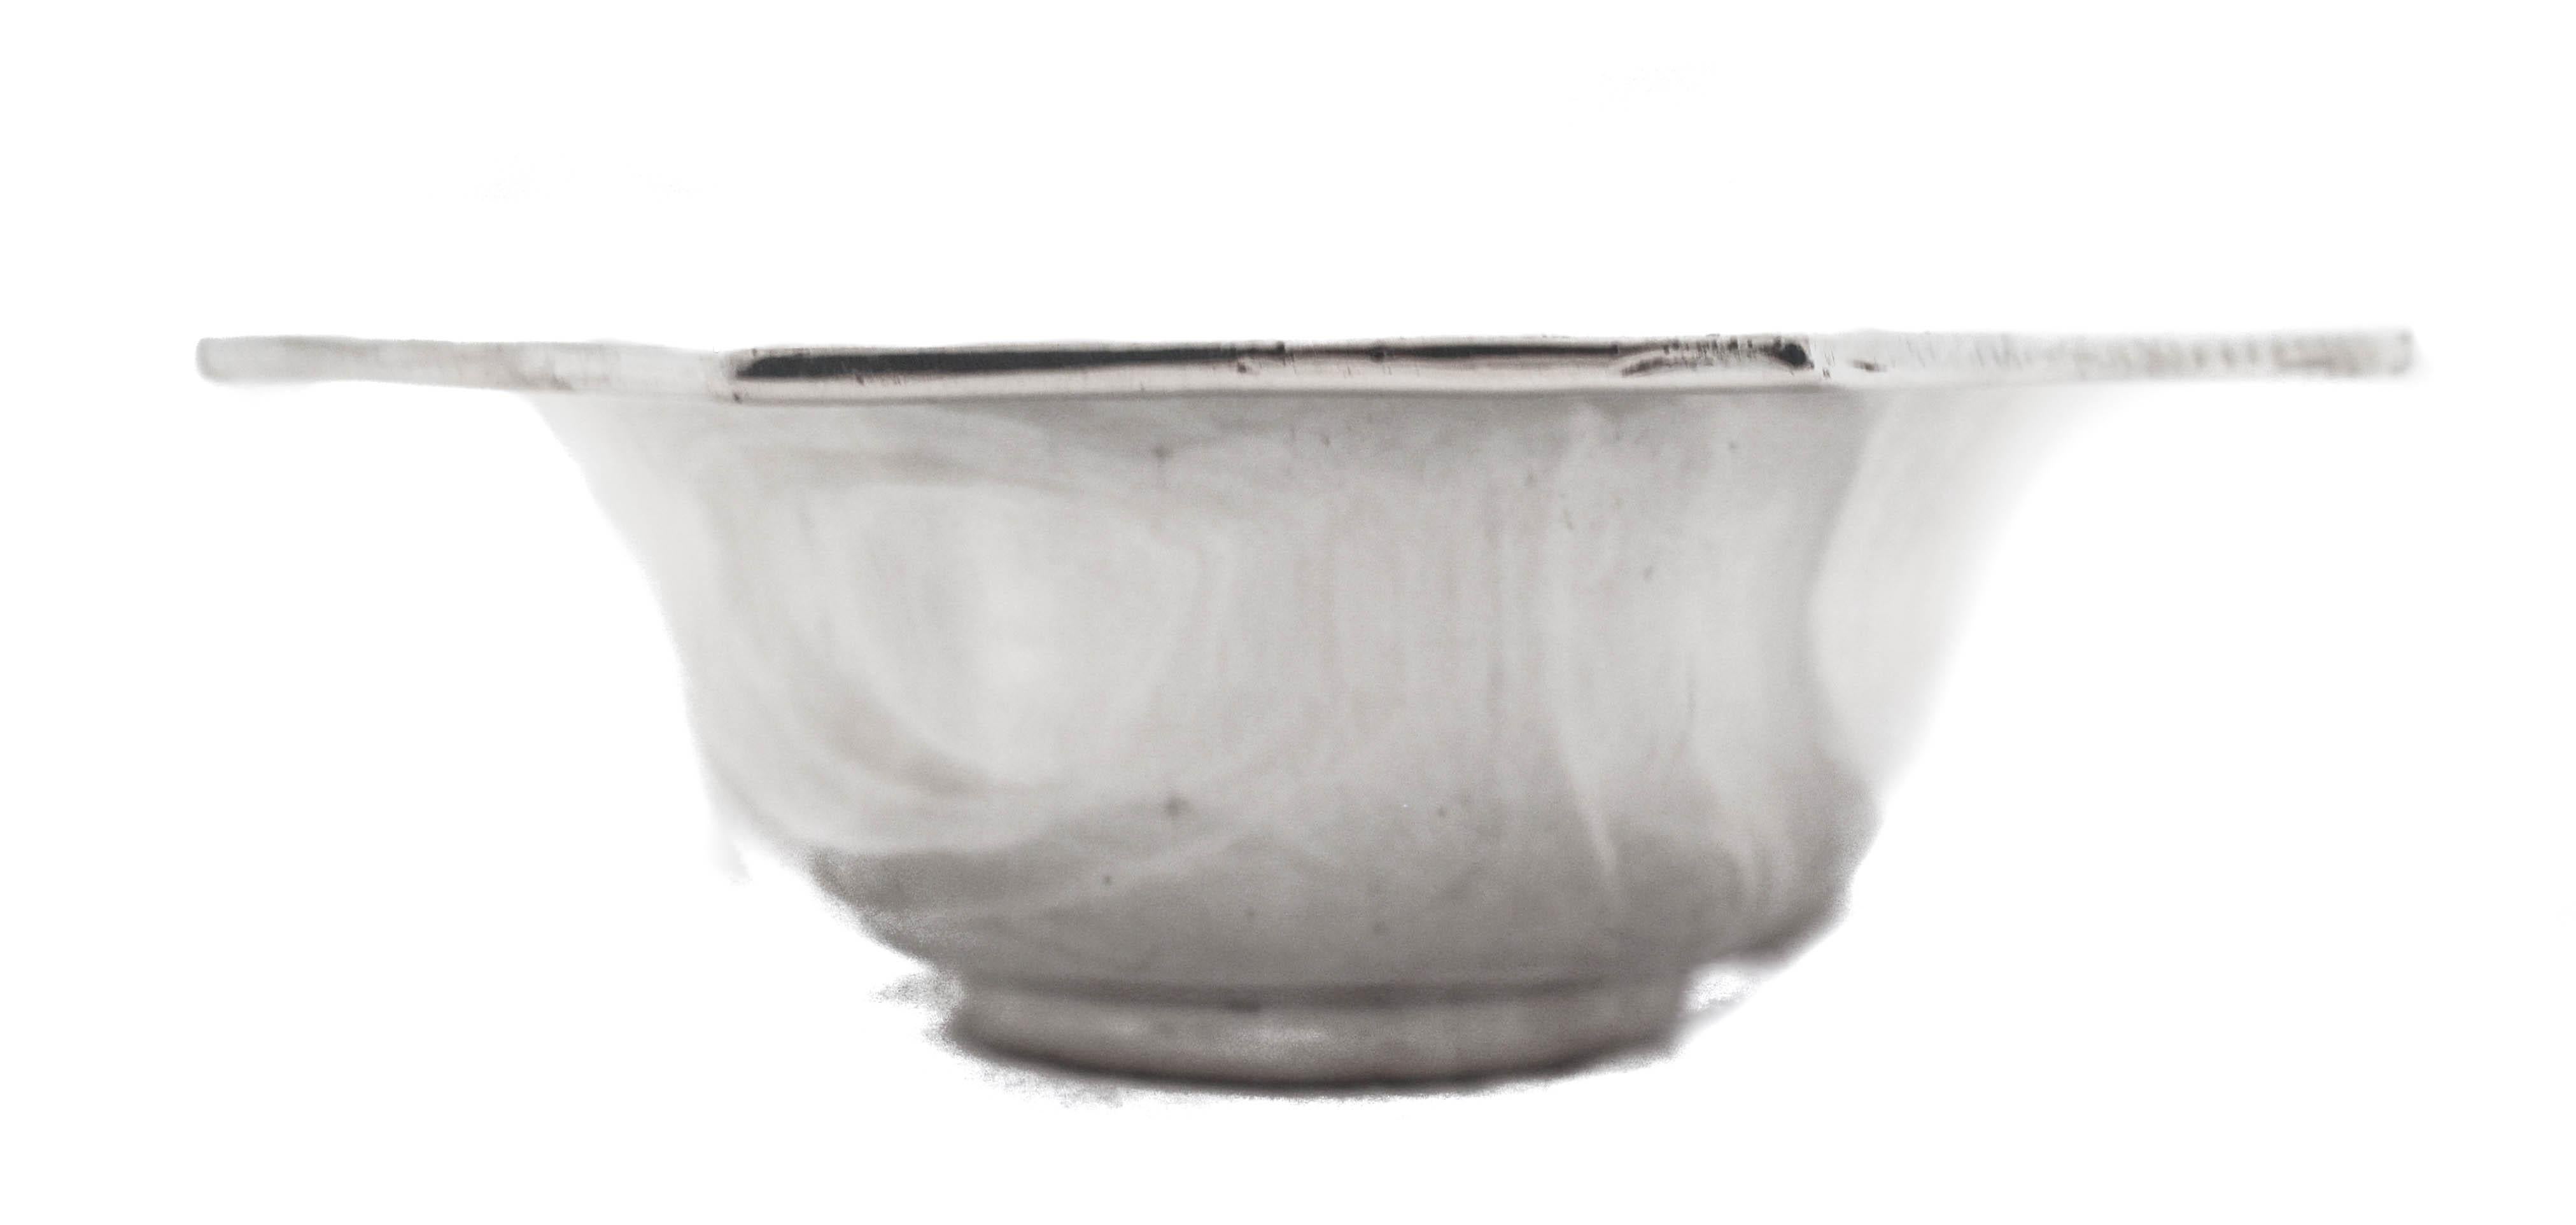 Being offered is a mid-century sterling silver candy bowl from the 1950’s. It is uber-sleek and has no etchings or decoration— just a clean modern piece. The rim is scalloped giving it an open and airy feel. The perfect size for your bar or coffee